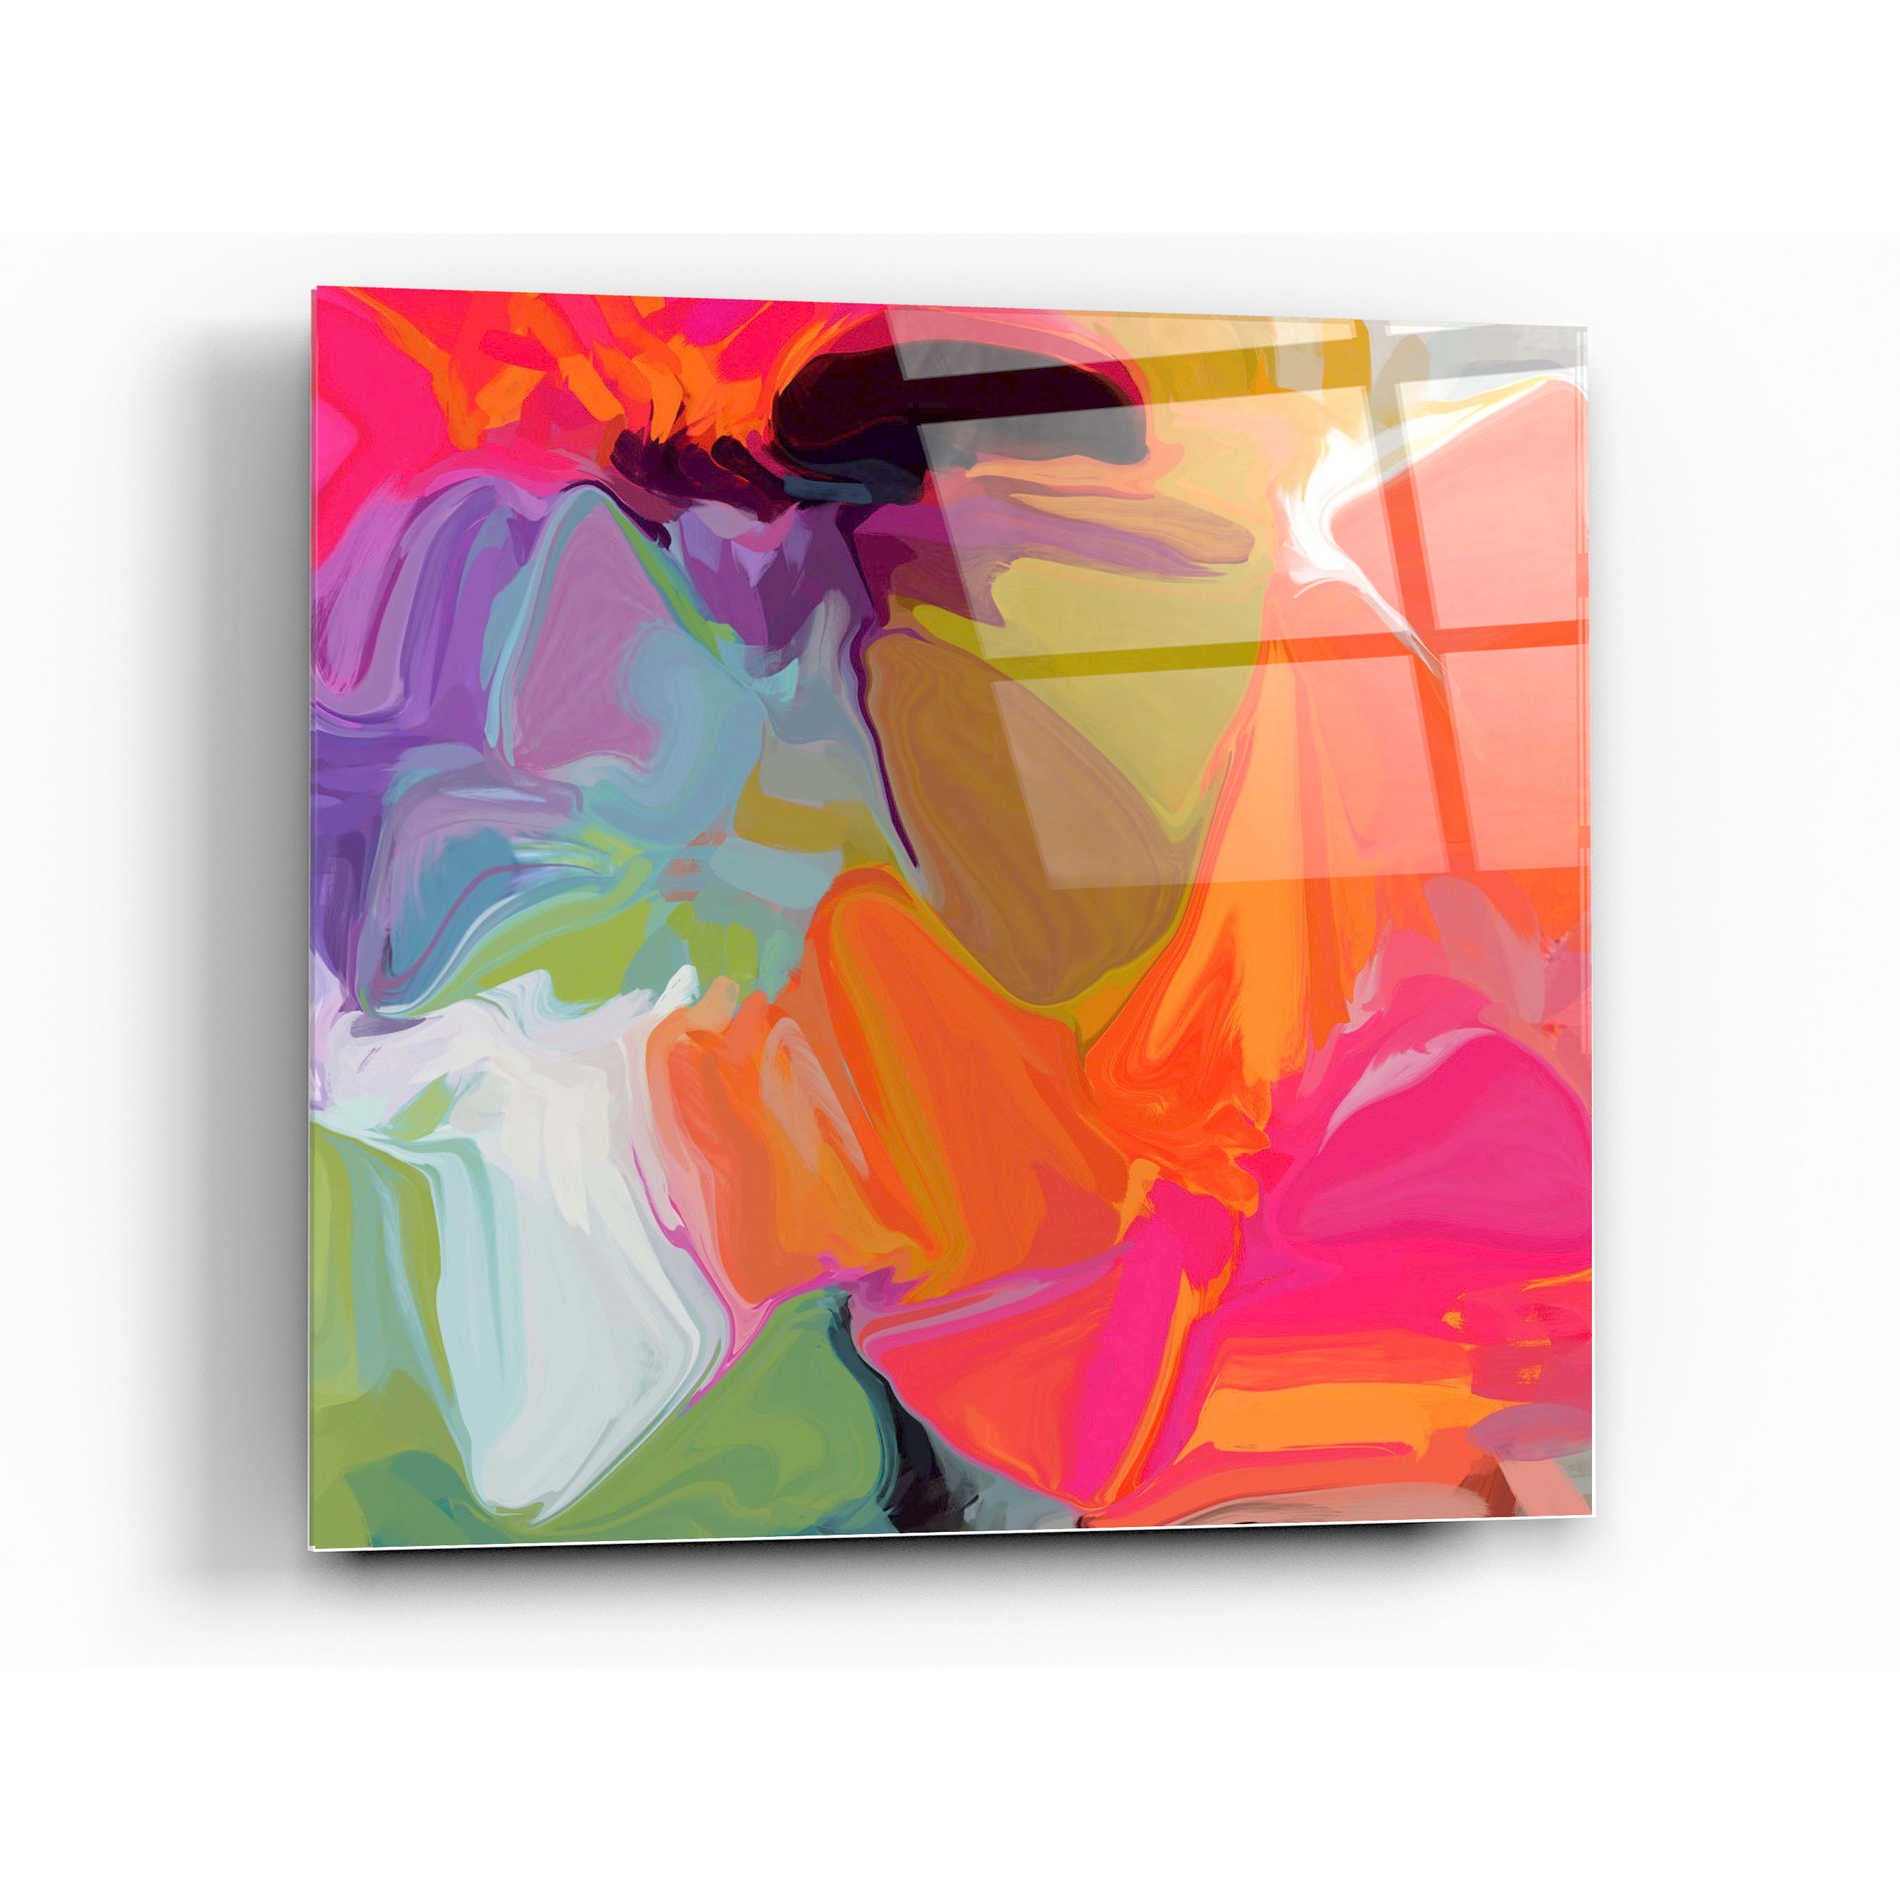 Epic Art 'Color Vibrations 2' by Irena Orlov, Acrylic Glass Wall Art,36x36